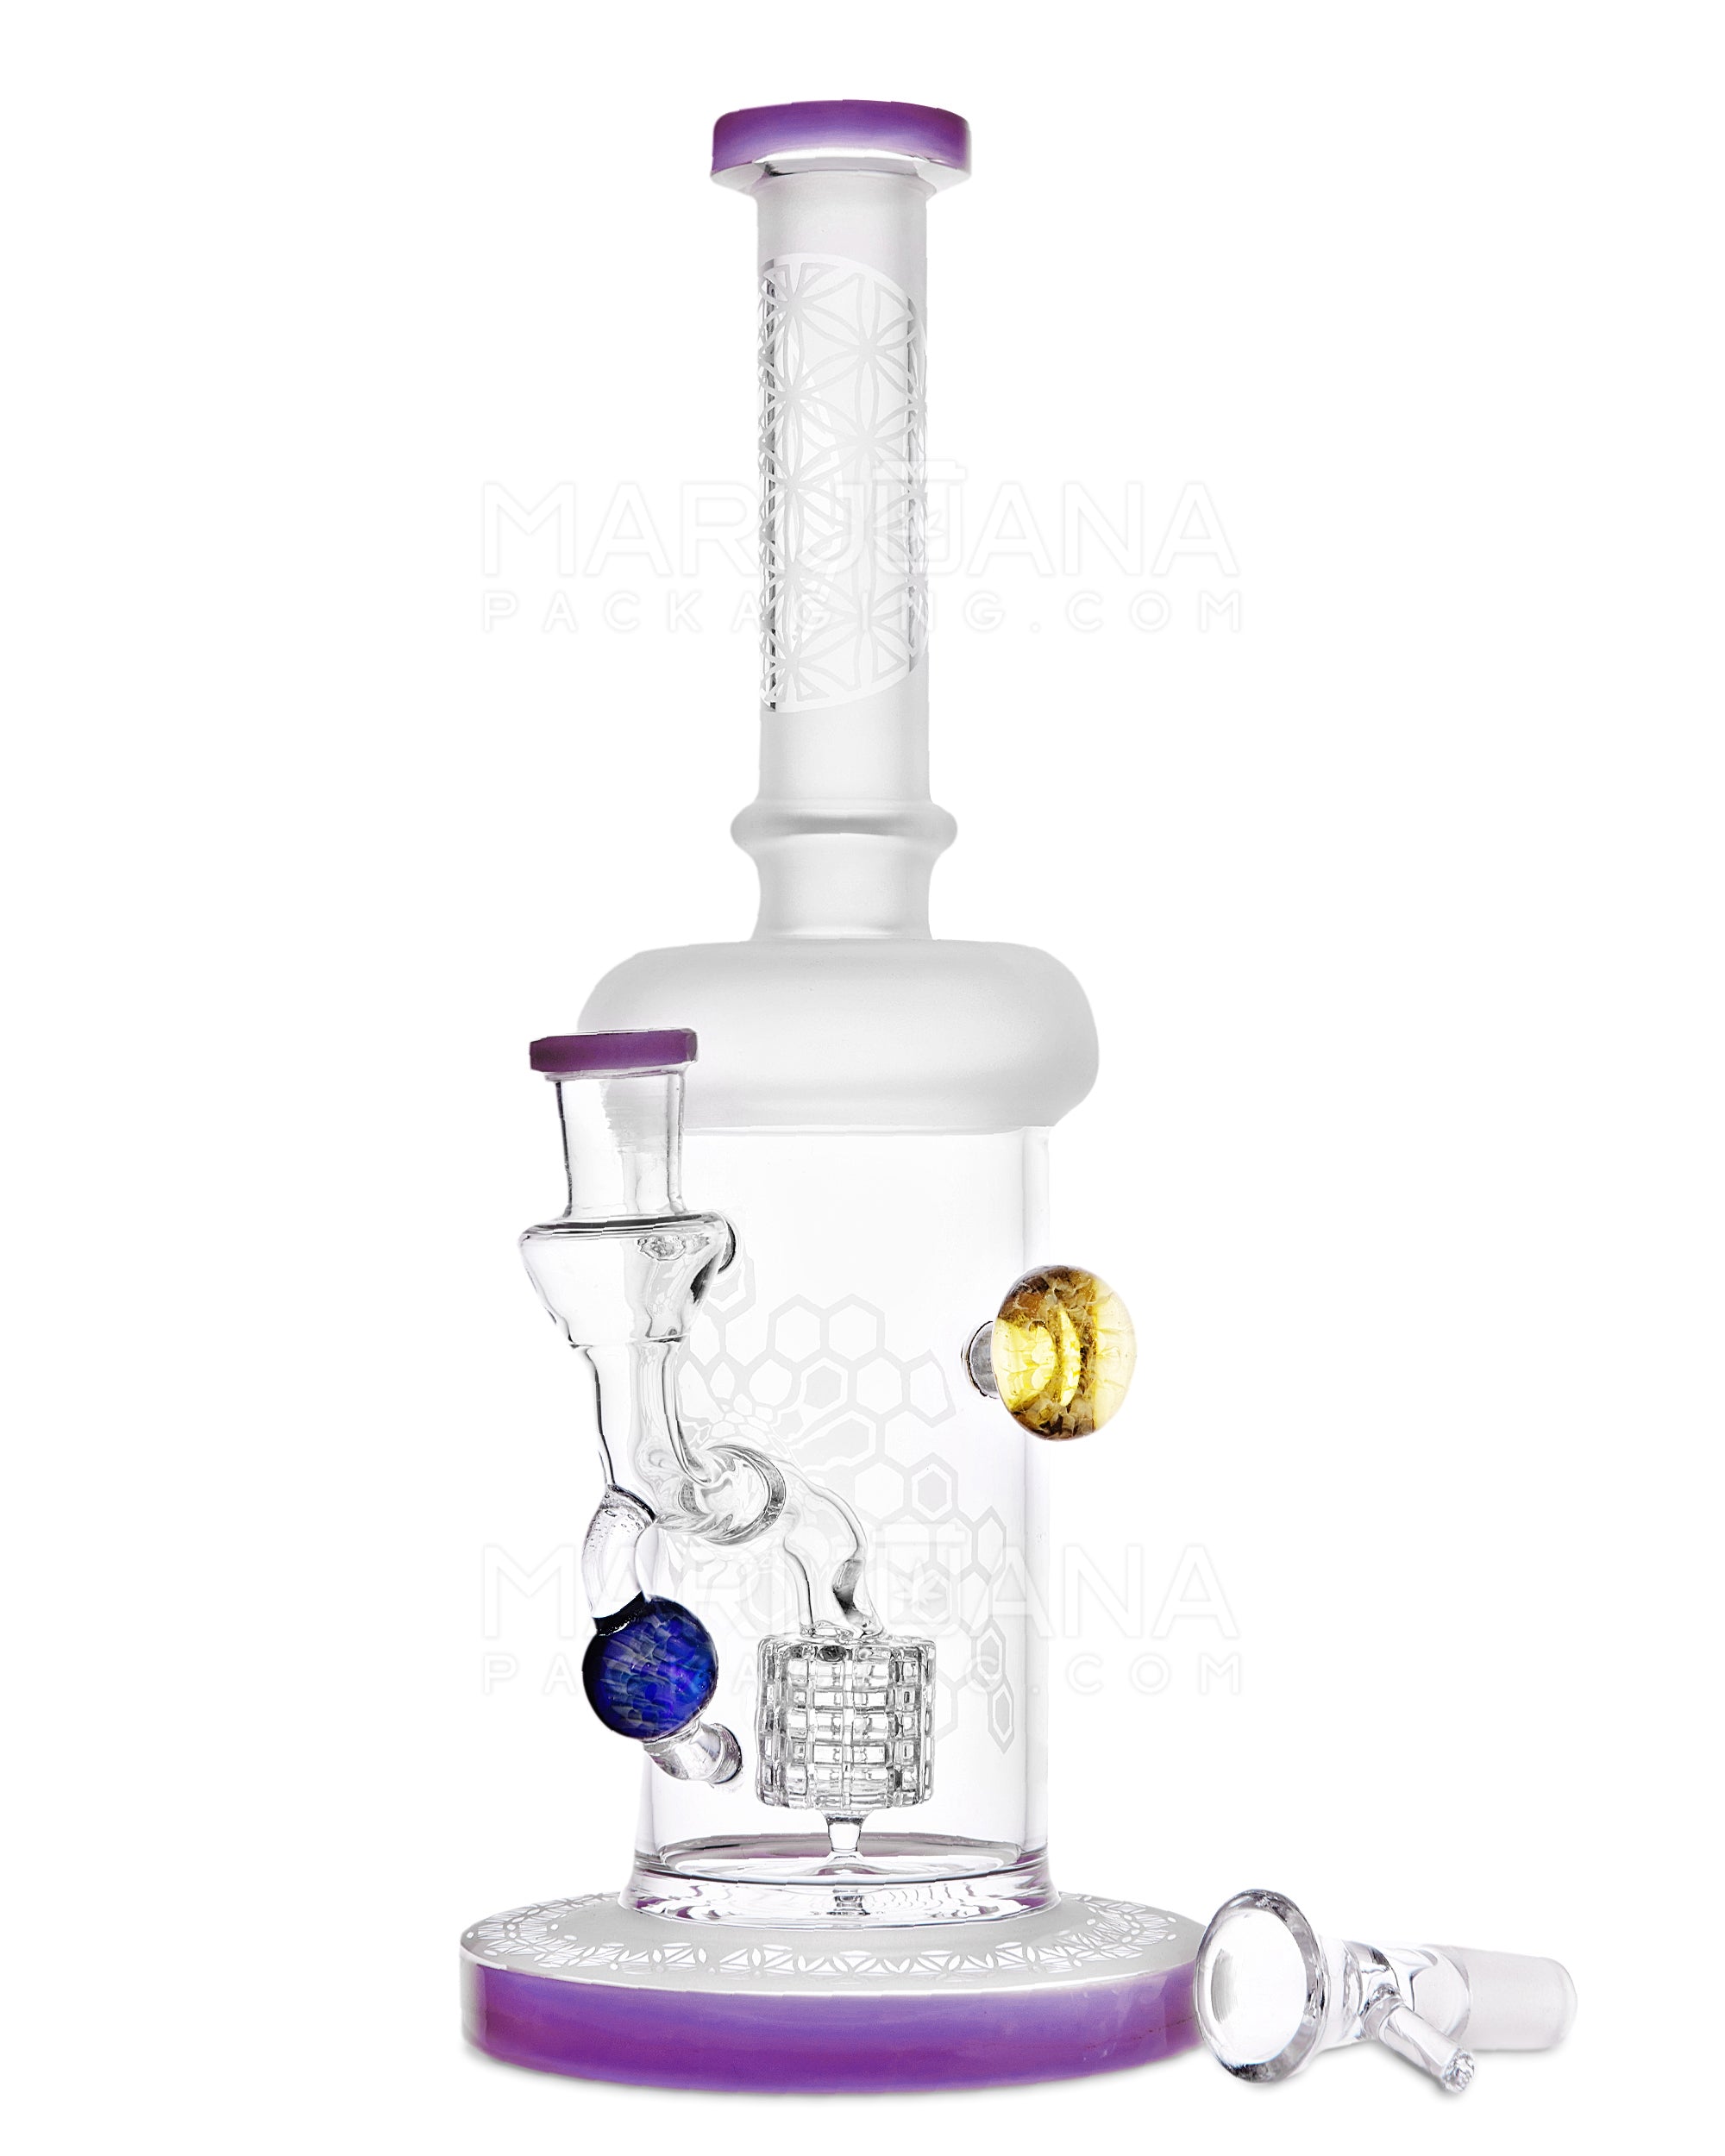 USA Glass | Straight Neck Matrix Perc Sandblasted Glass Water Pipe w/ Implosion Marbles | 11in Tall - 14mm Bowl - Purple - 2